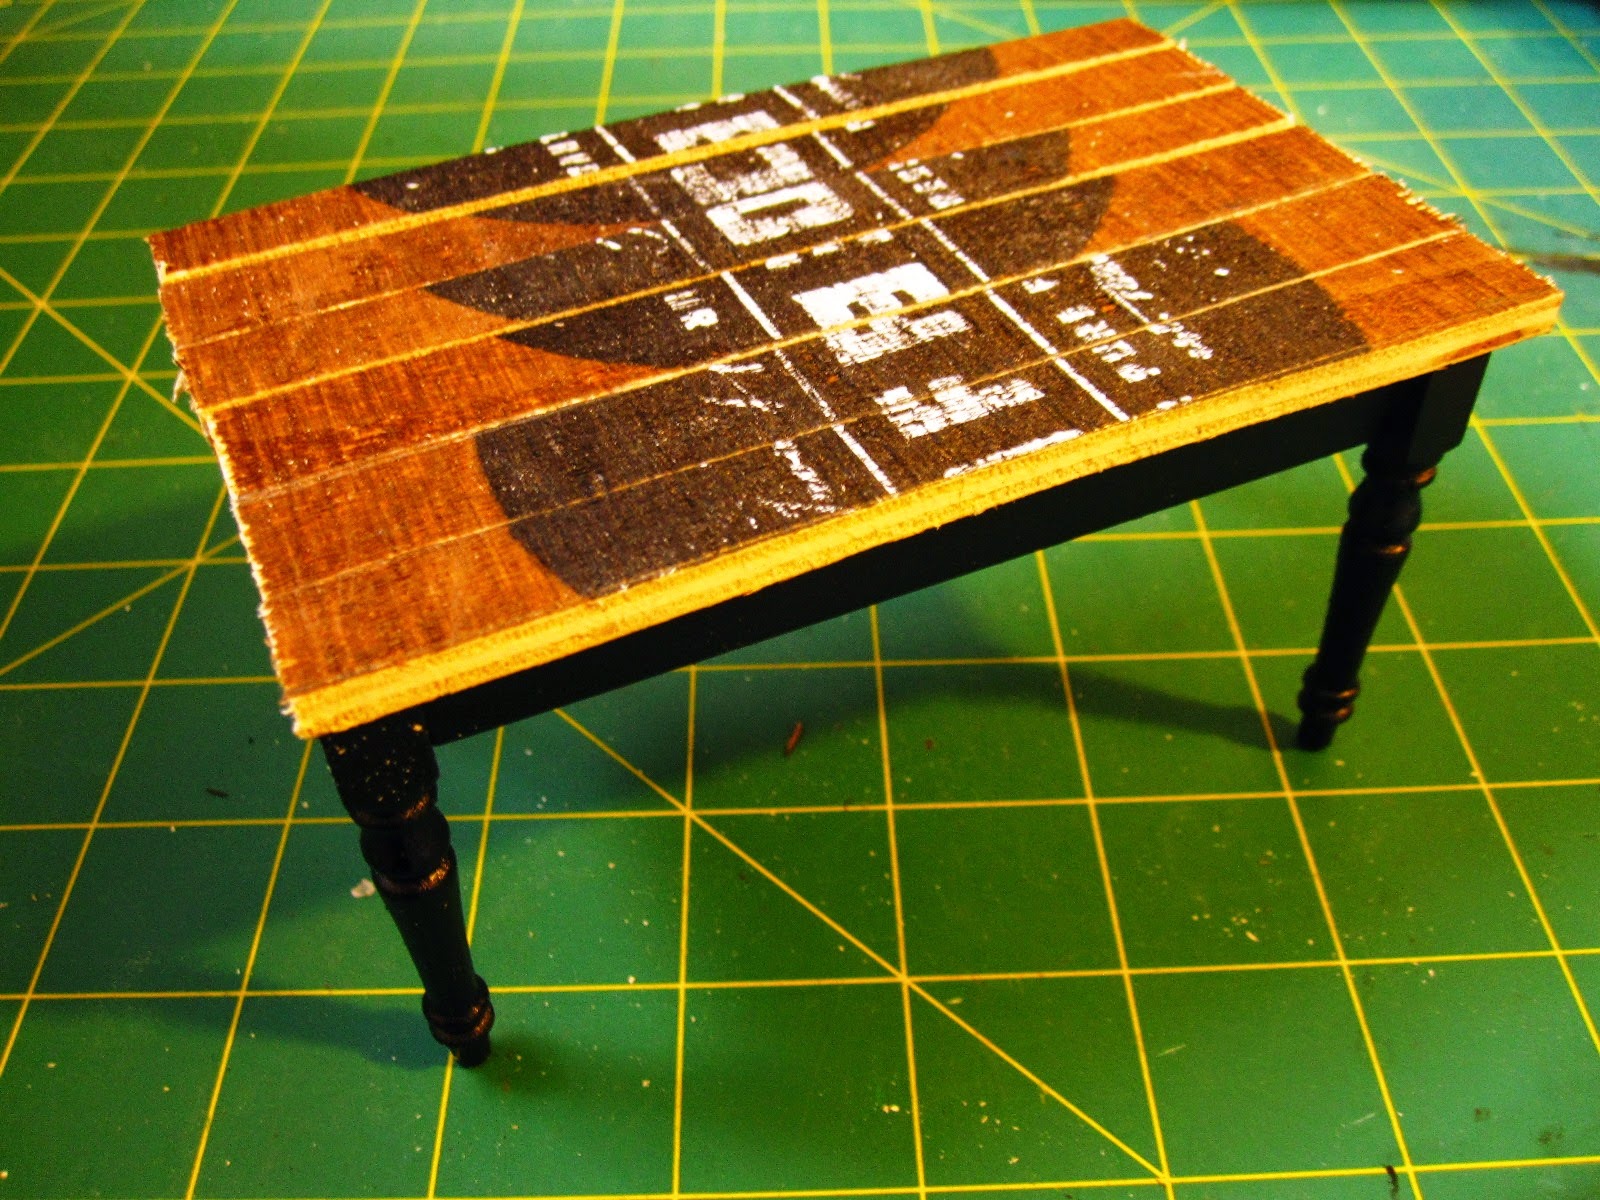 Miniature dining table leg assembly, painted black, topped with a top made of lengths of rustic-looking wood with black printing on them.